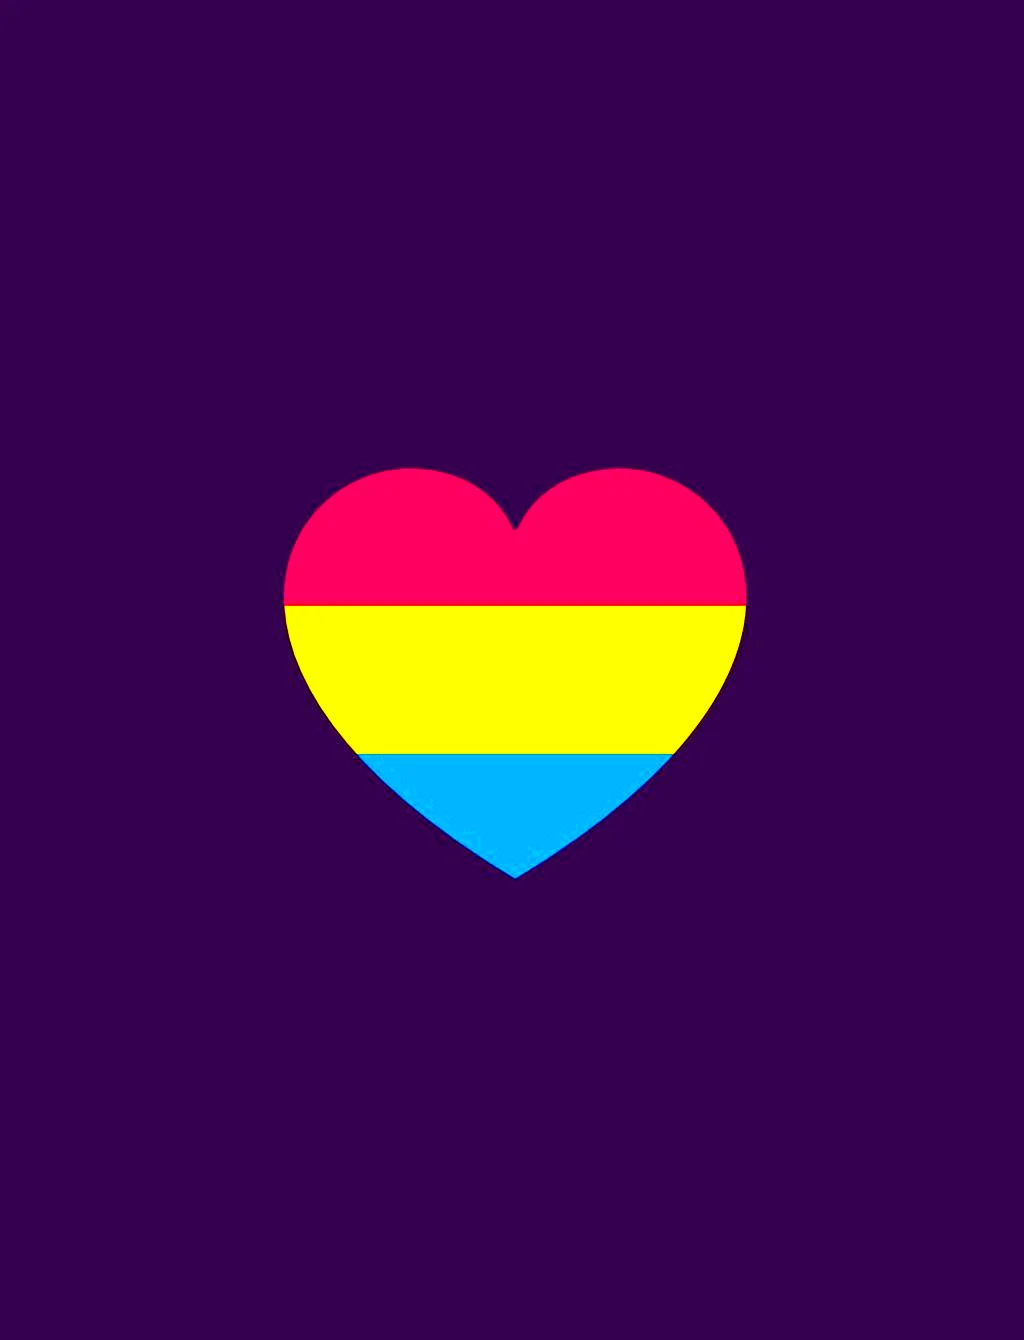 Pansexual Wallpaper For iPhone